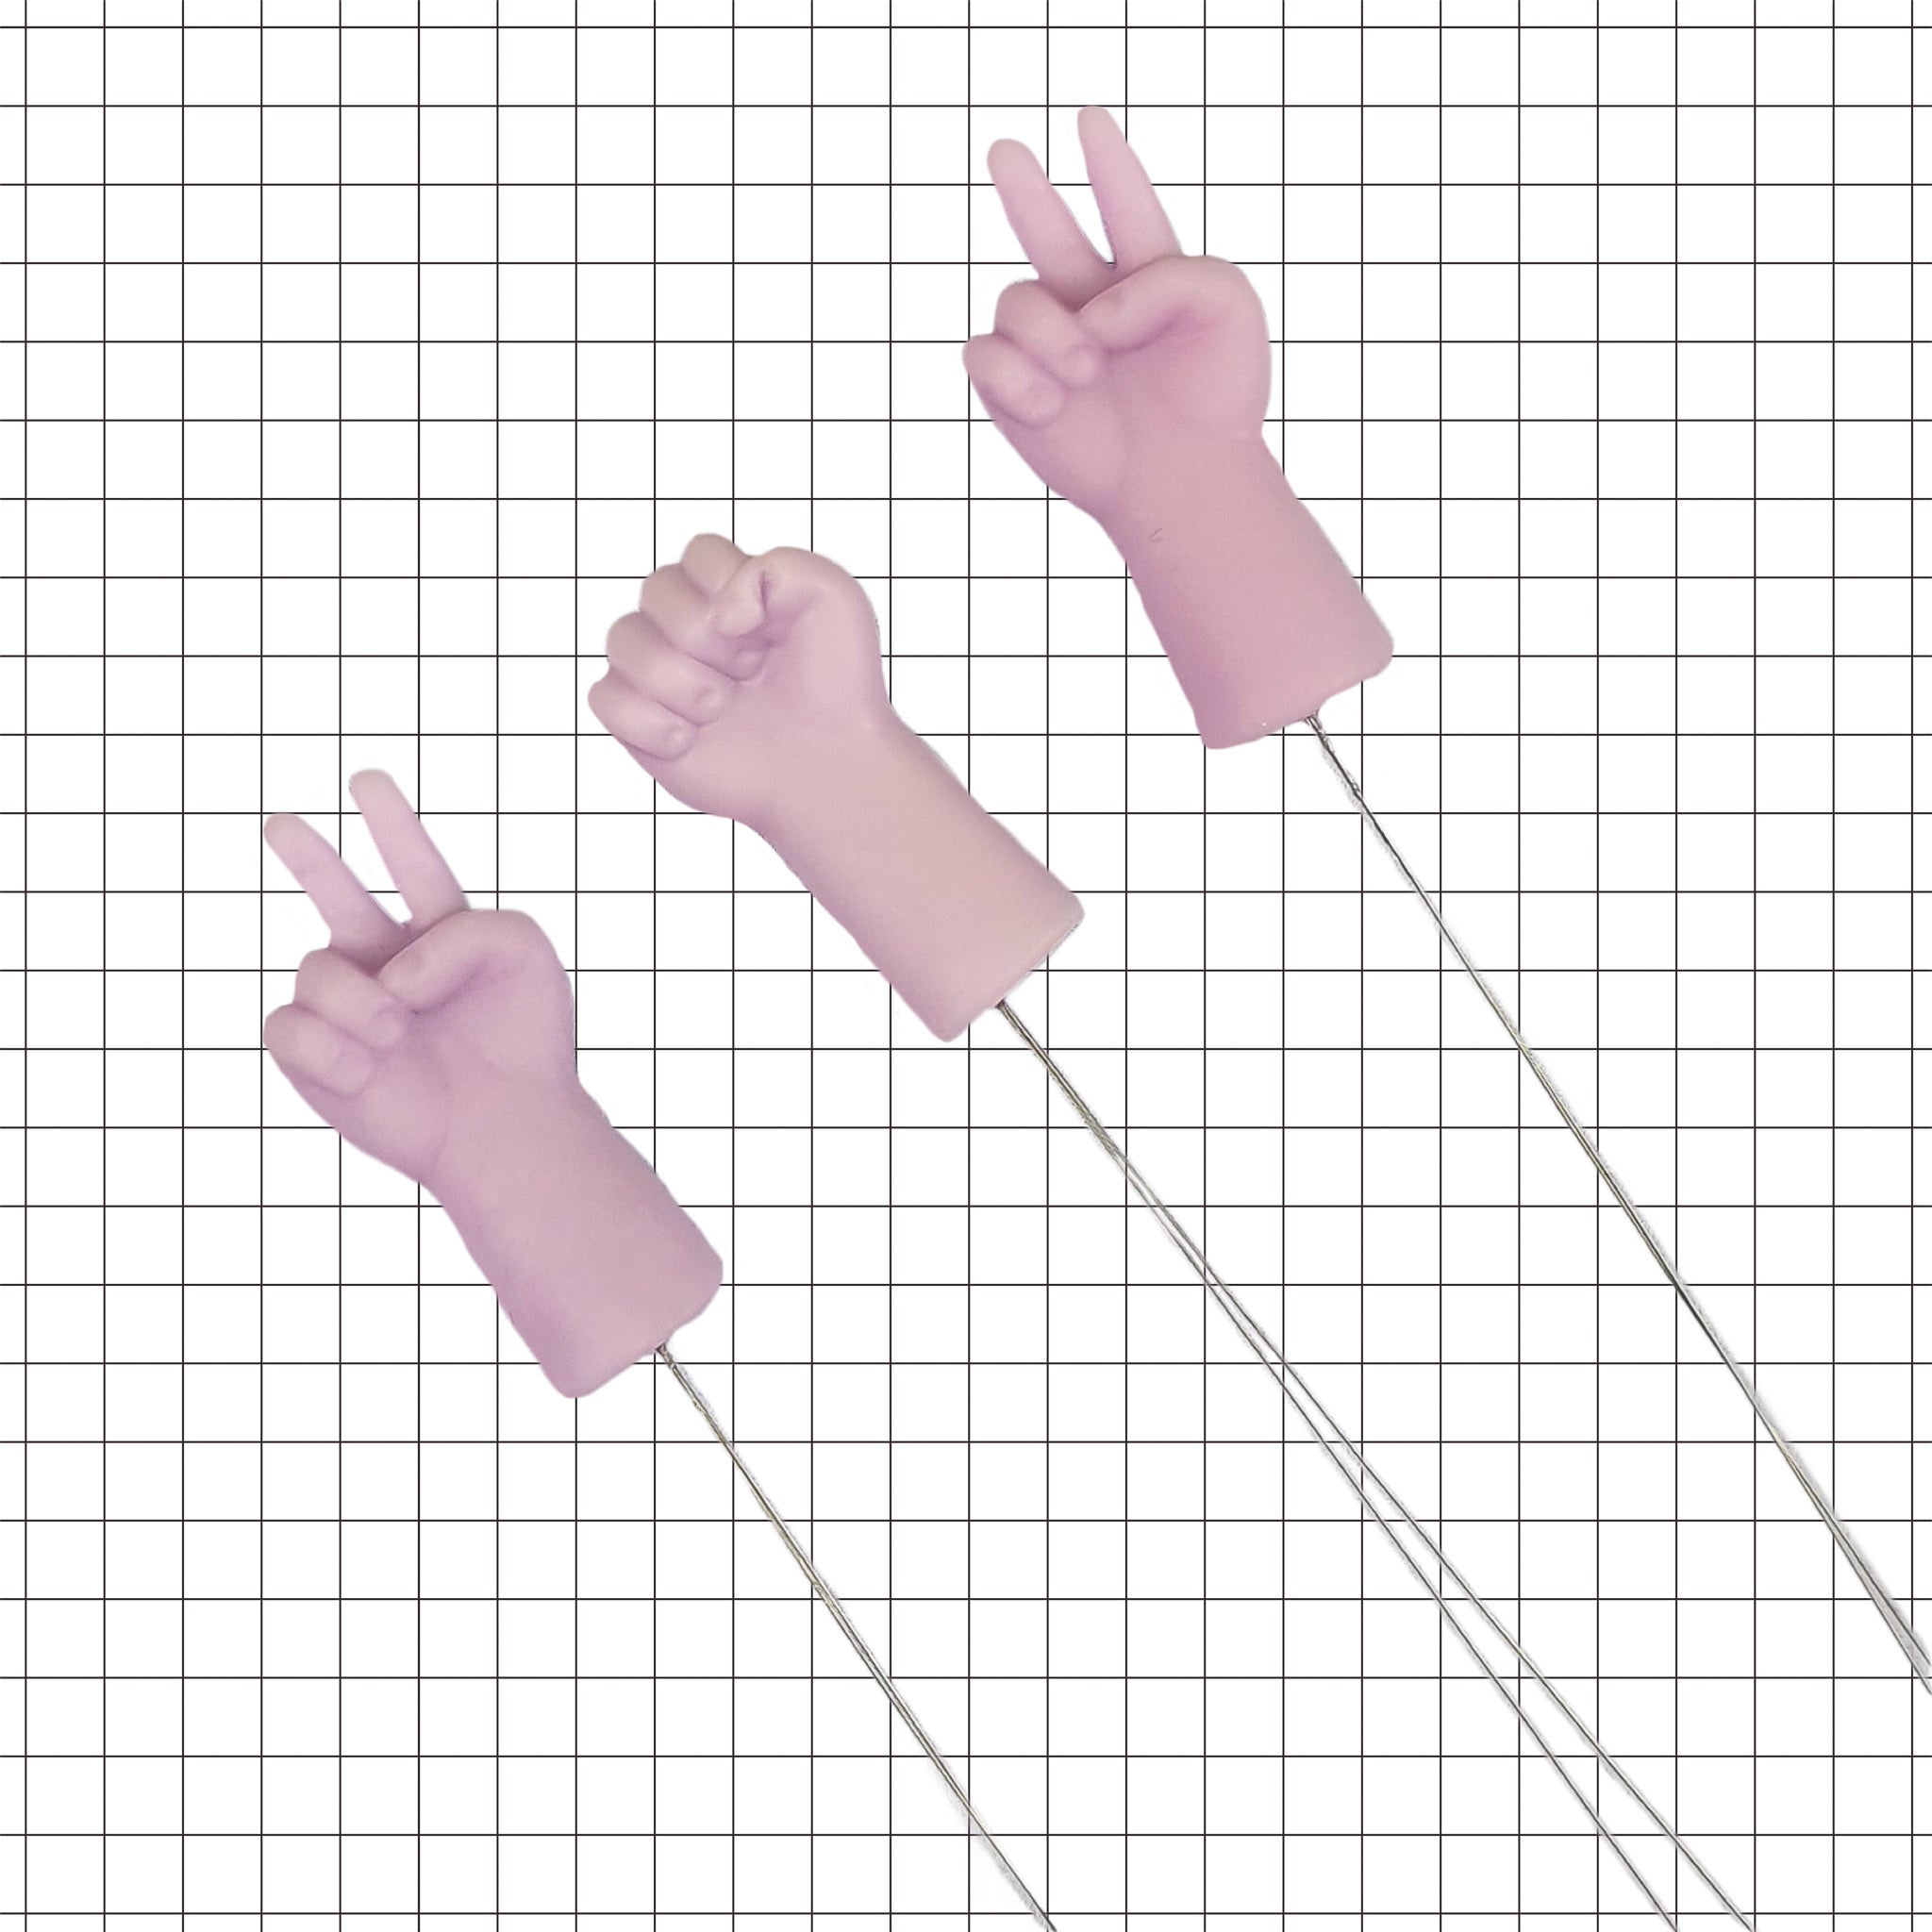 Needle threaders with peace sign hands on white grid background